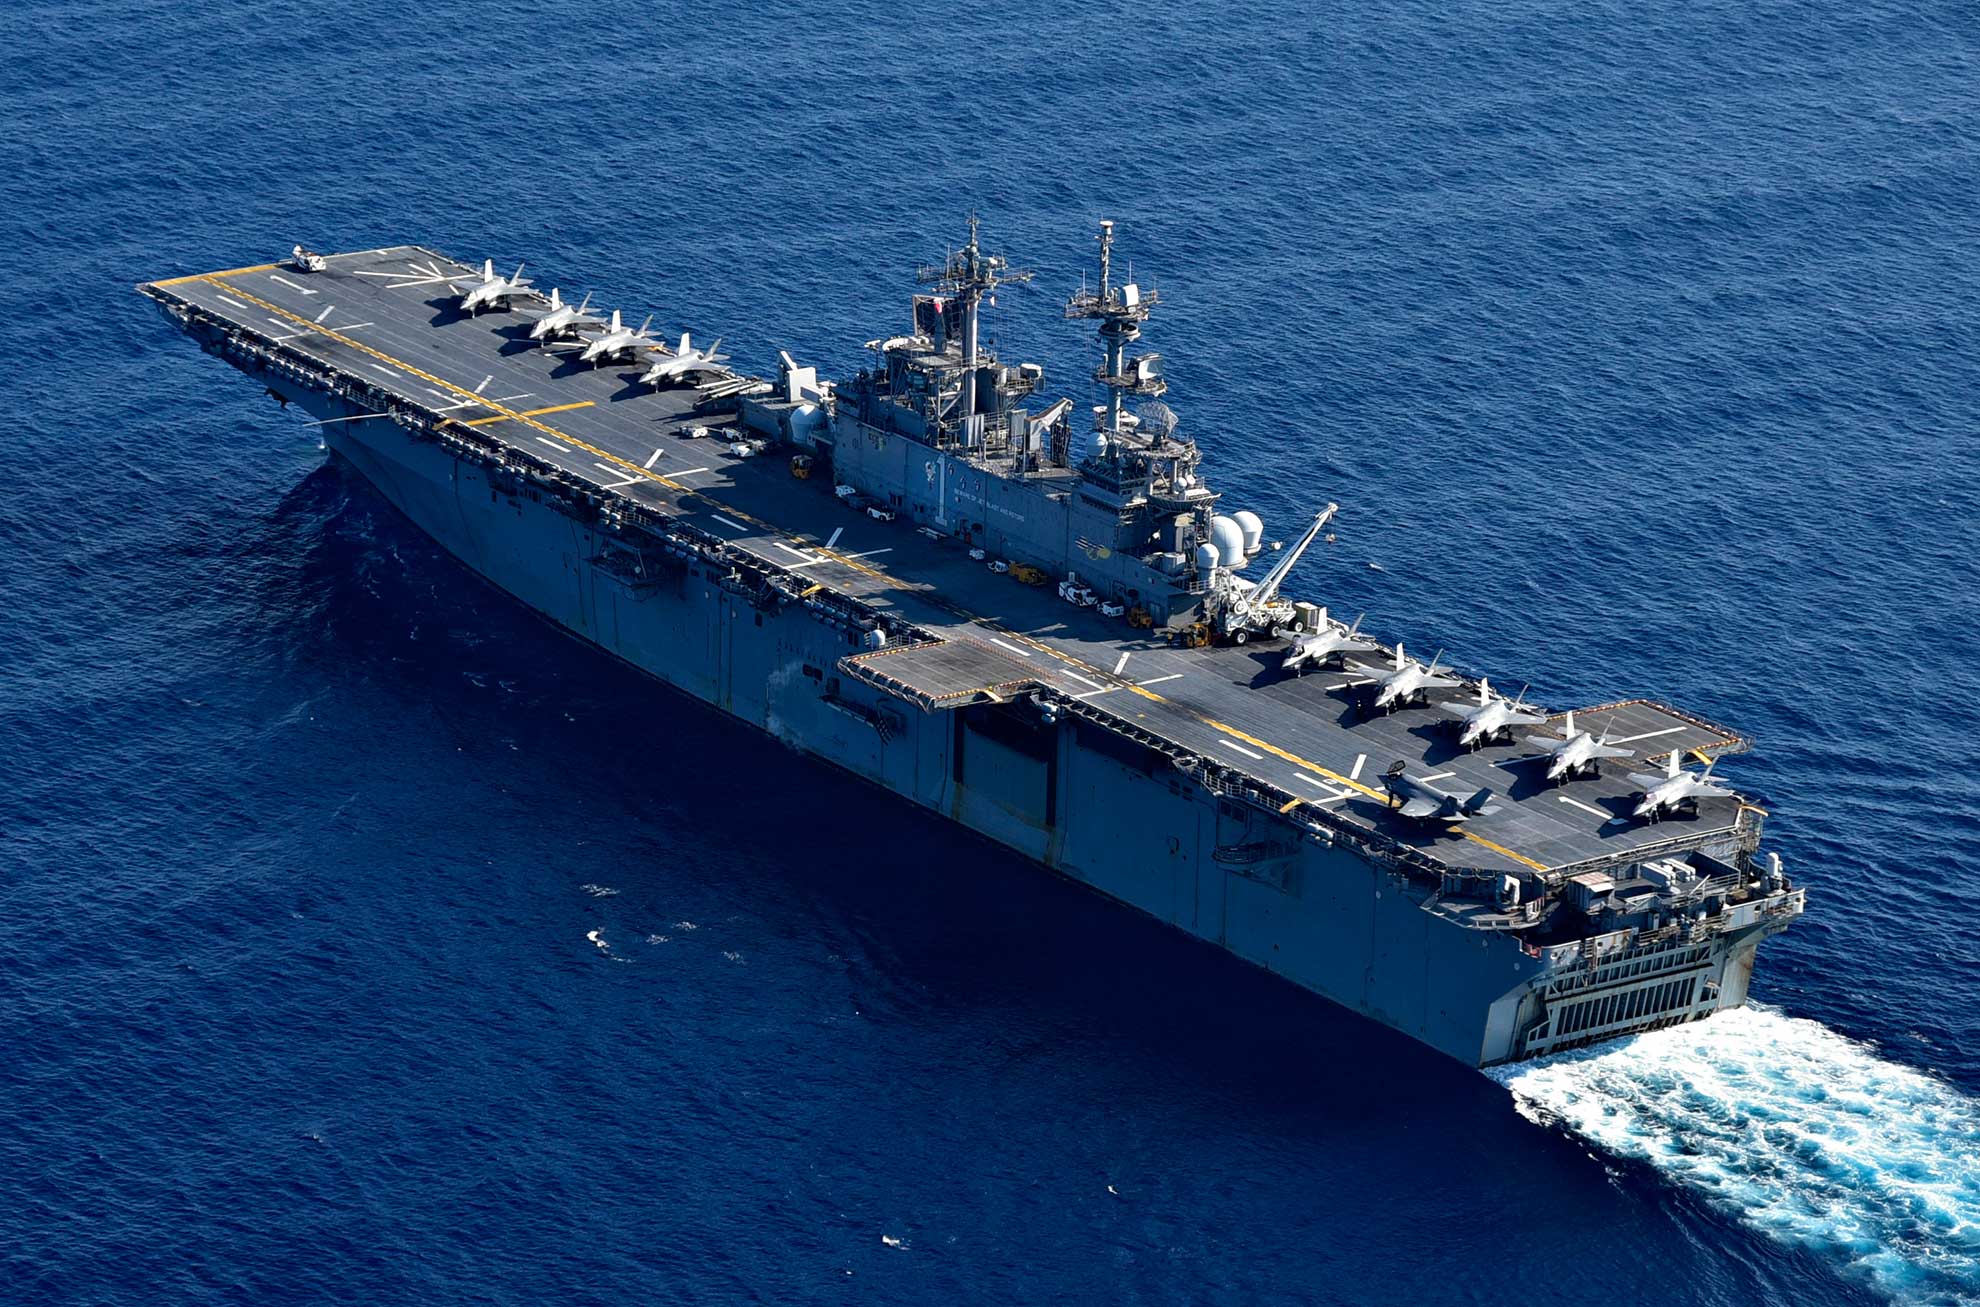 South China Sea (April 5, 2019) The amphibious assault ship USS Wasp (LHD 1) is operating in the South China Sea in support of Exercise Balikatan 2019. In its 35th iteration, Balikatan is an annual U.S.-Philippine military training exercise focused on a variety of missions, including humanitarian assistance and disaster relief, counter-terrorism, and other combined military operations -- U.S. Navy photo by MCS 1st Class Daniel Barker. -